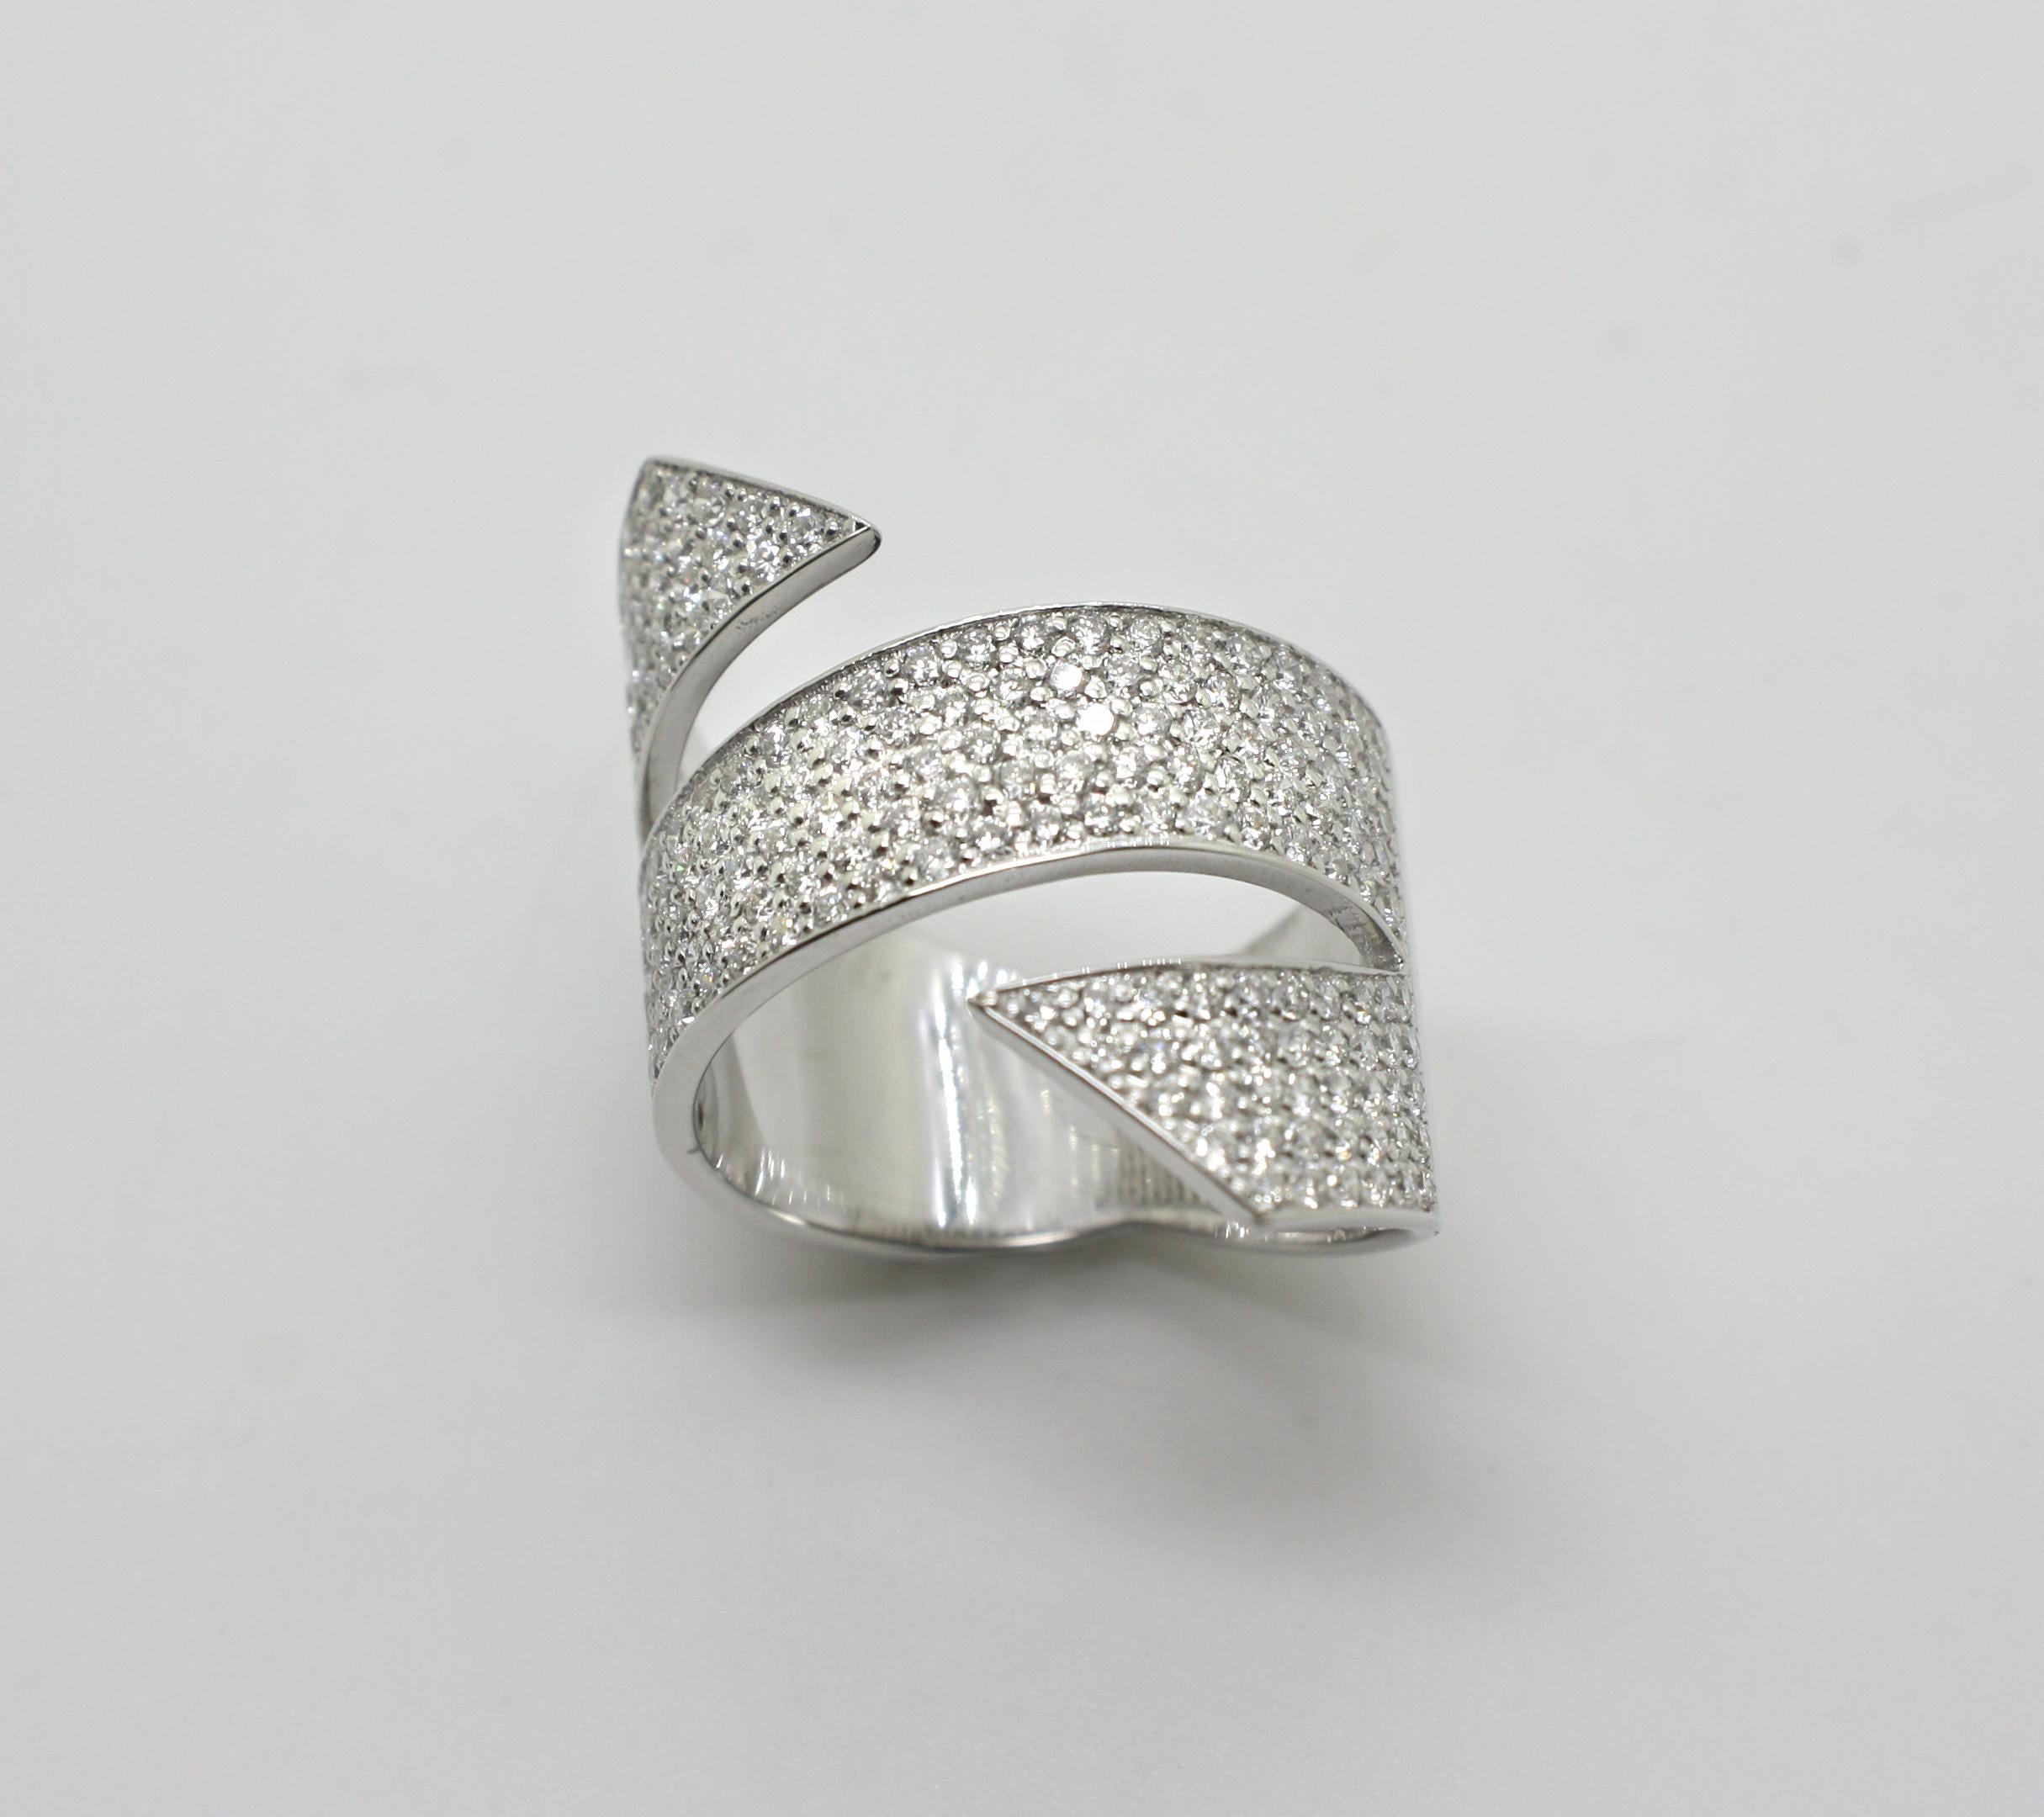 S.Georgios designer 18 Karat White Gold White Diamond Wide Band Ring is all handmade in a unique spiral design. The gorgeous wide band features brilliant-cut white diamonds total weight of 1.50 Carat giving the ring a stunning appearance. 
We also